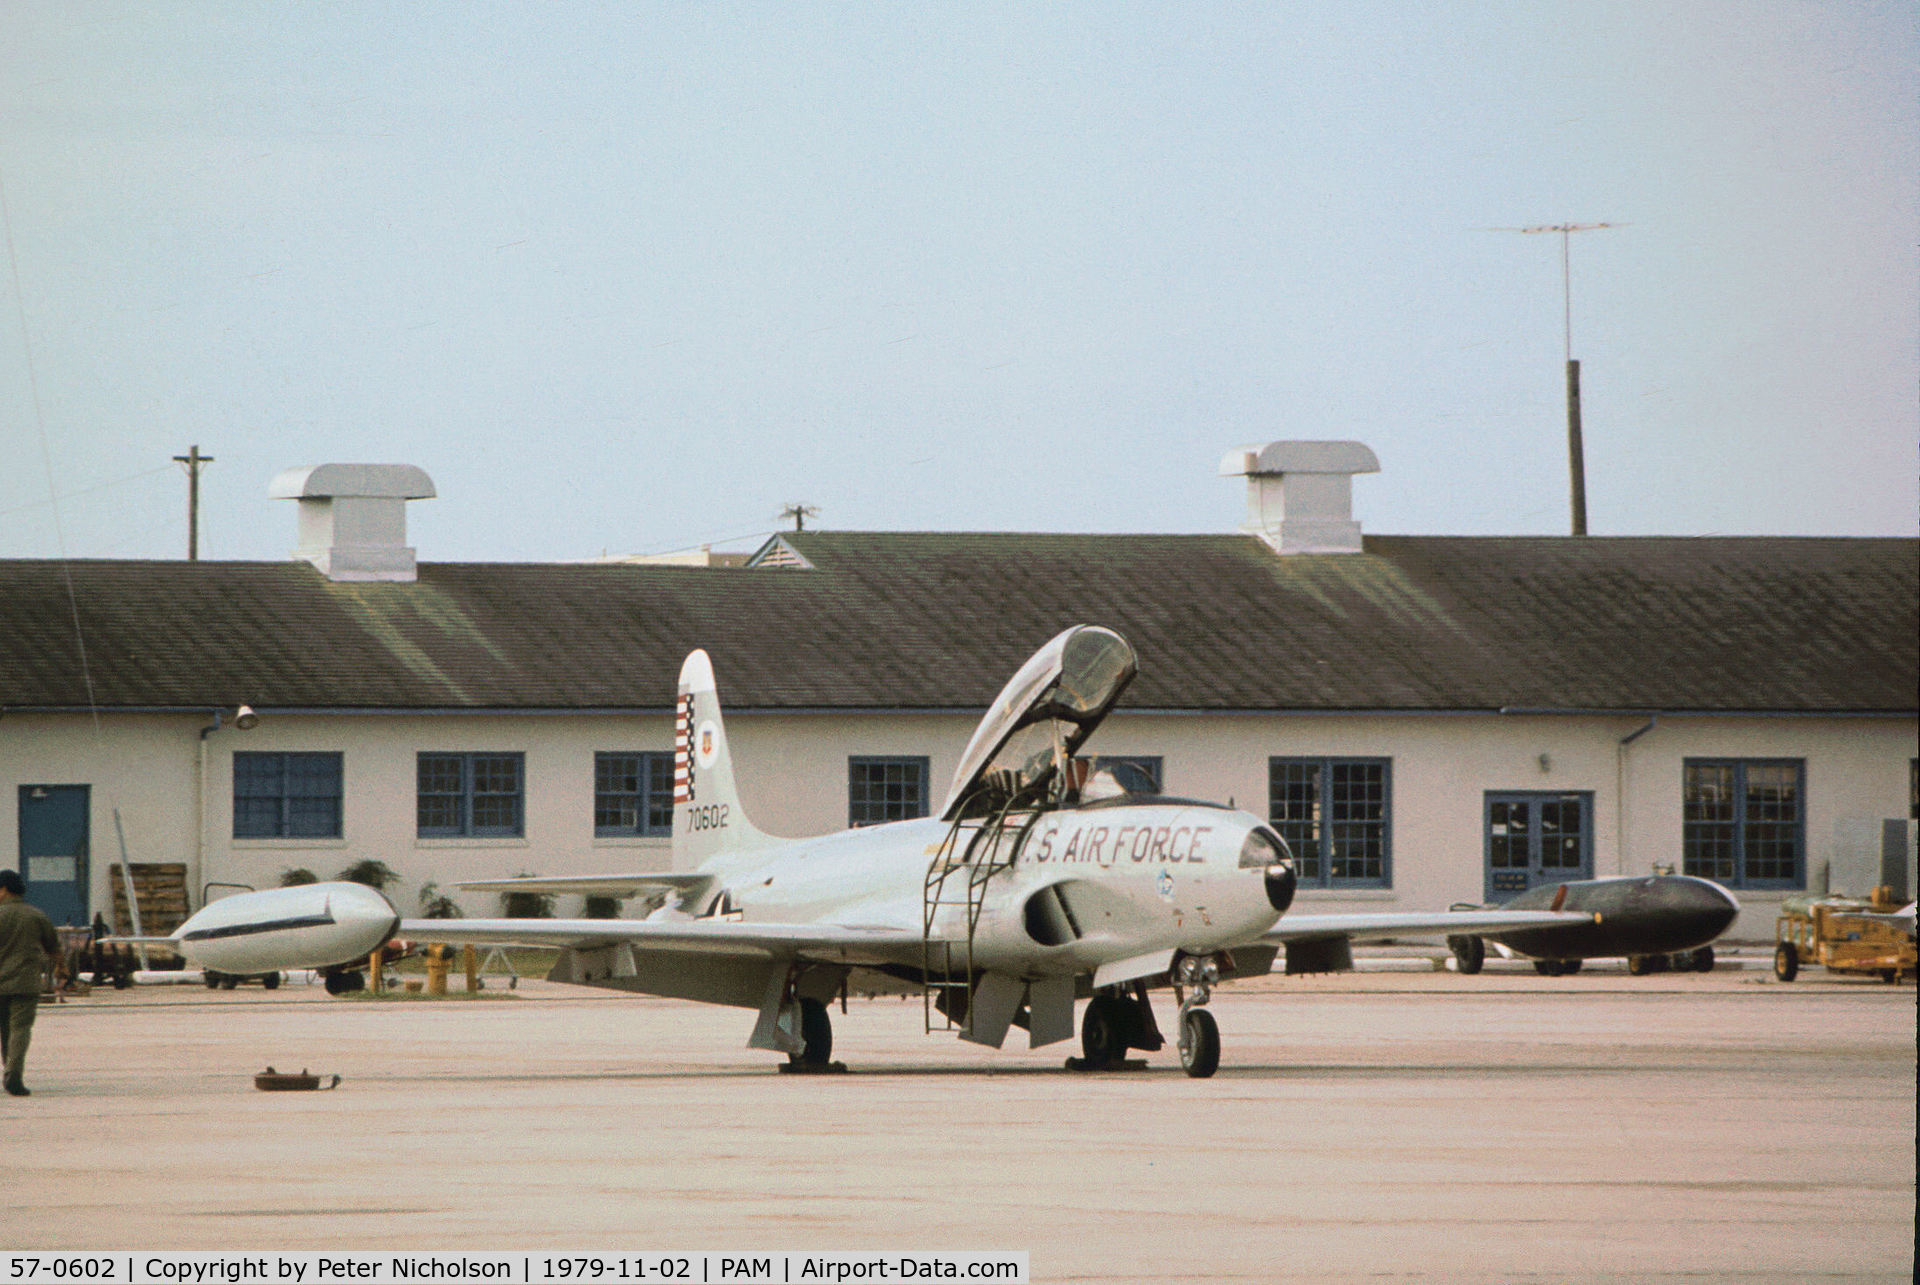 57-0602, 1957 Lockheed T-33A Shooting Star C/N 580-1251, T-33A Shooting Star of 95th Fighter Interceptor Training Squadron at Tyndall AFB in November 1979.